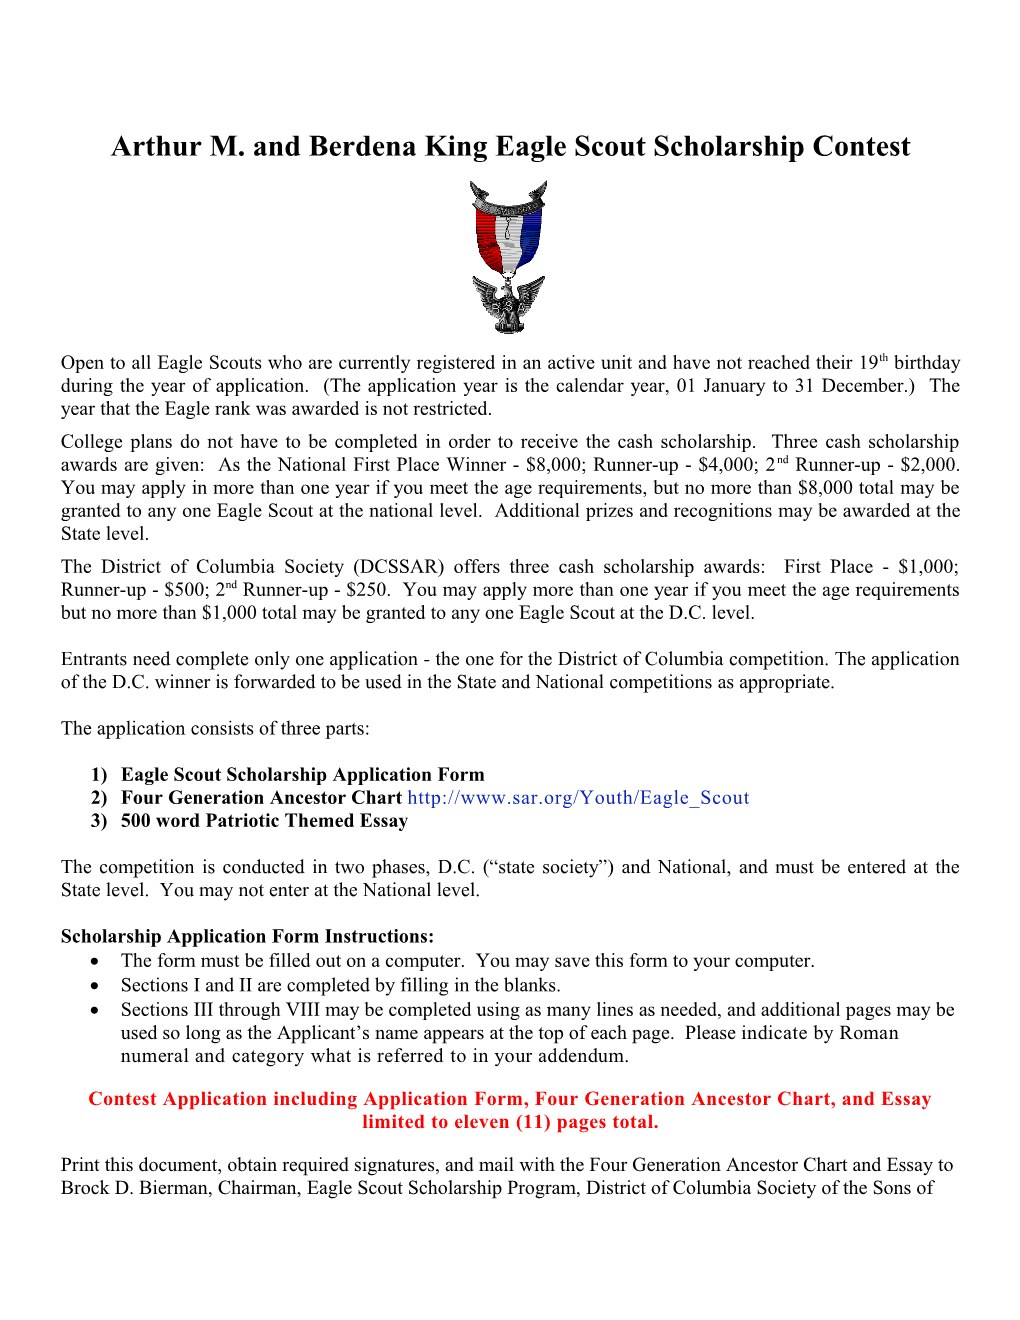 Arthur M. and Berdena King Eagle Scout Scholarship Contest